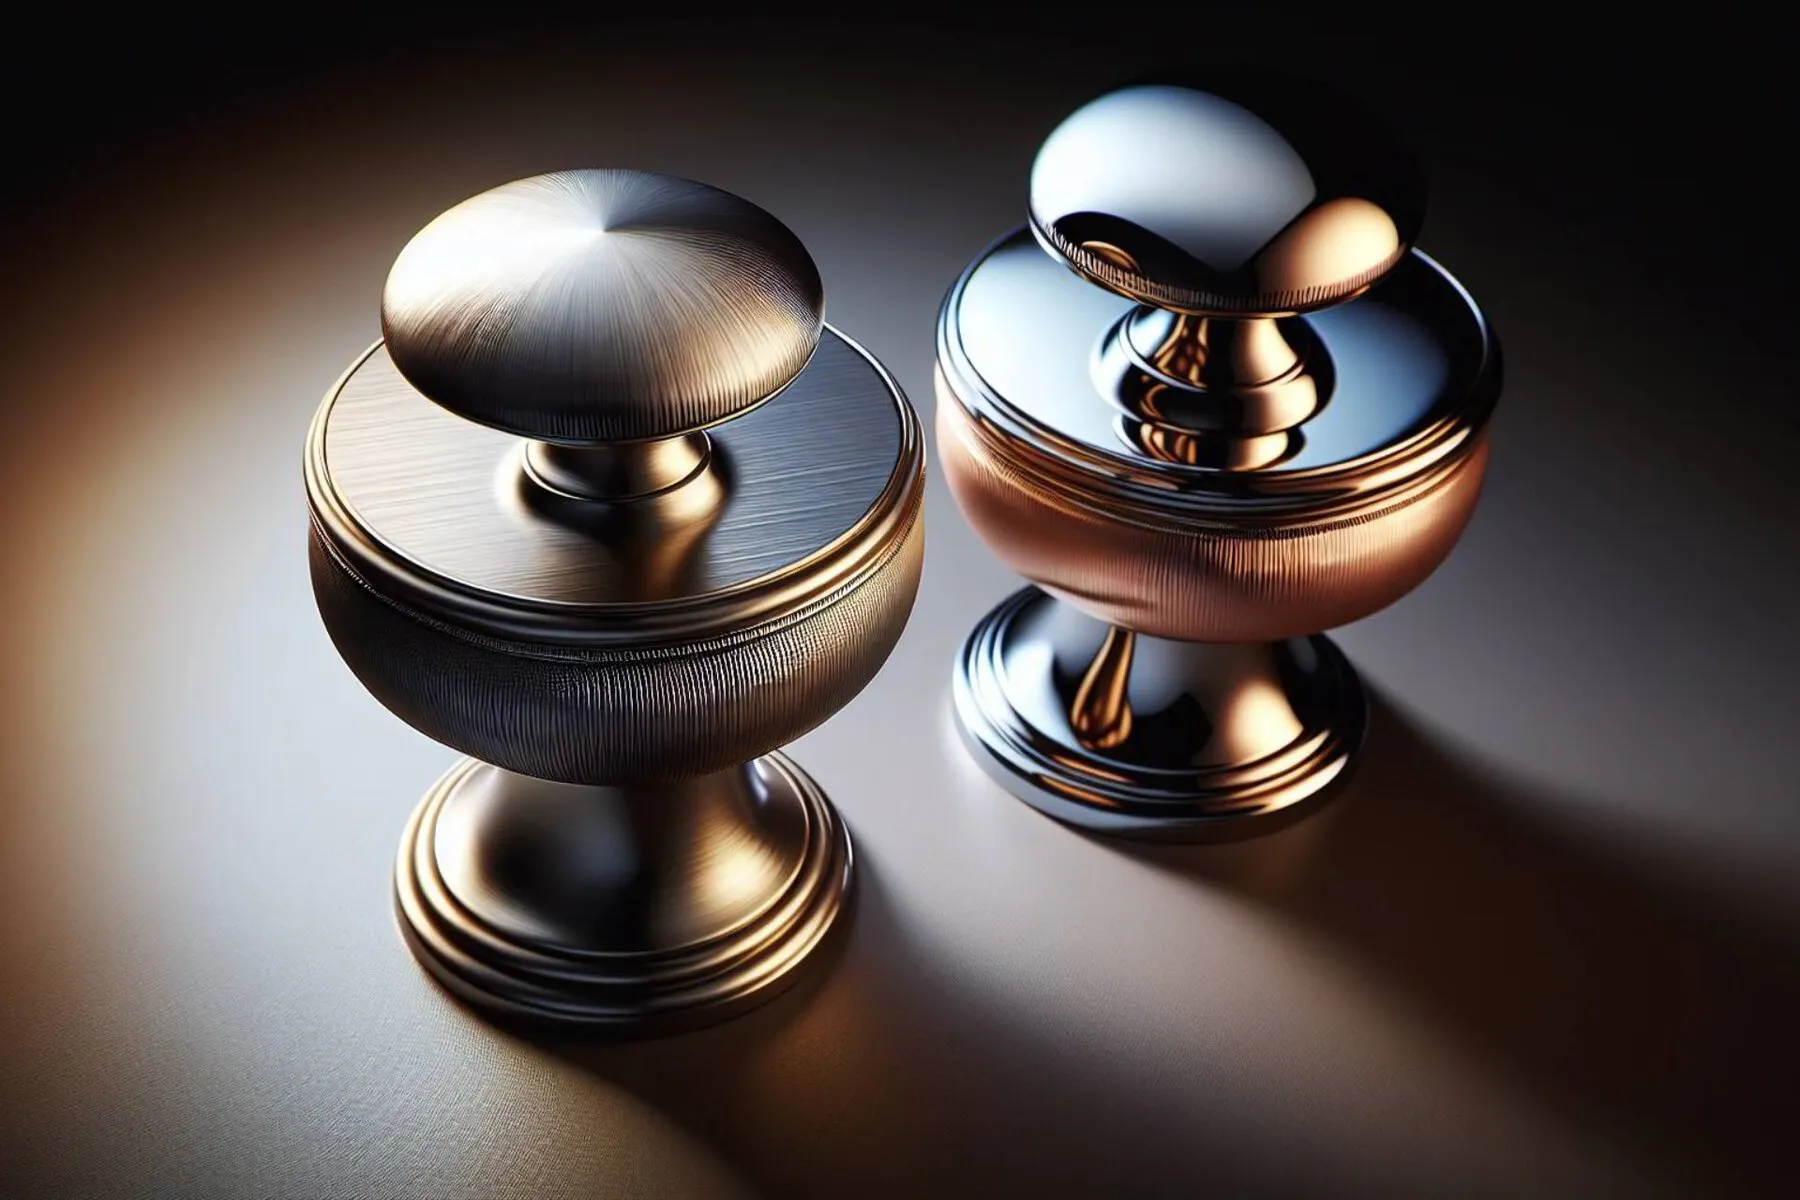 What is the difference between chrome and brushed nickel finishes?